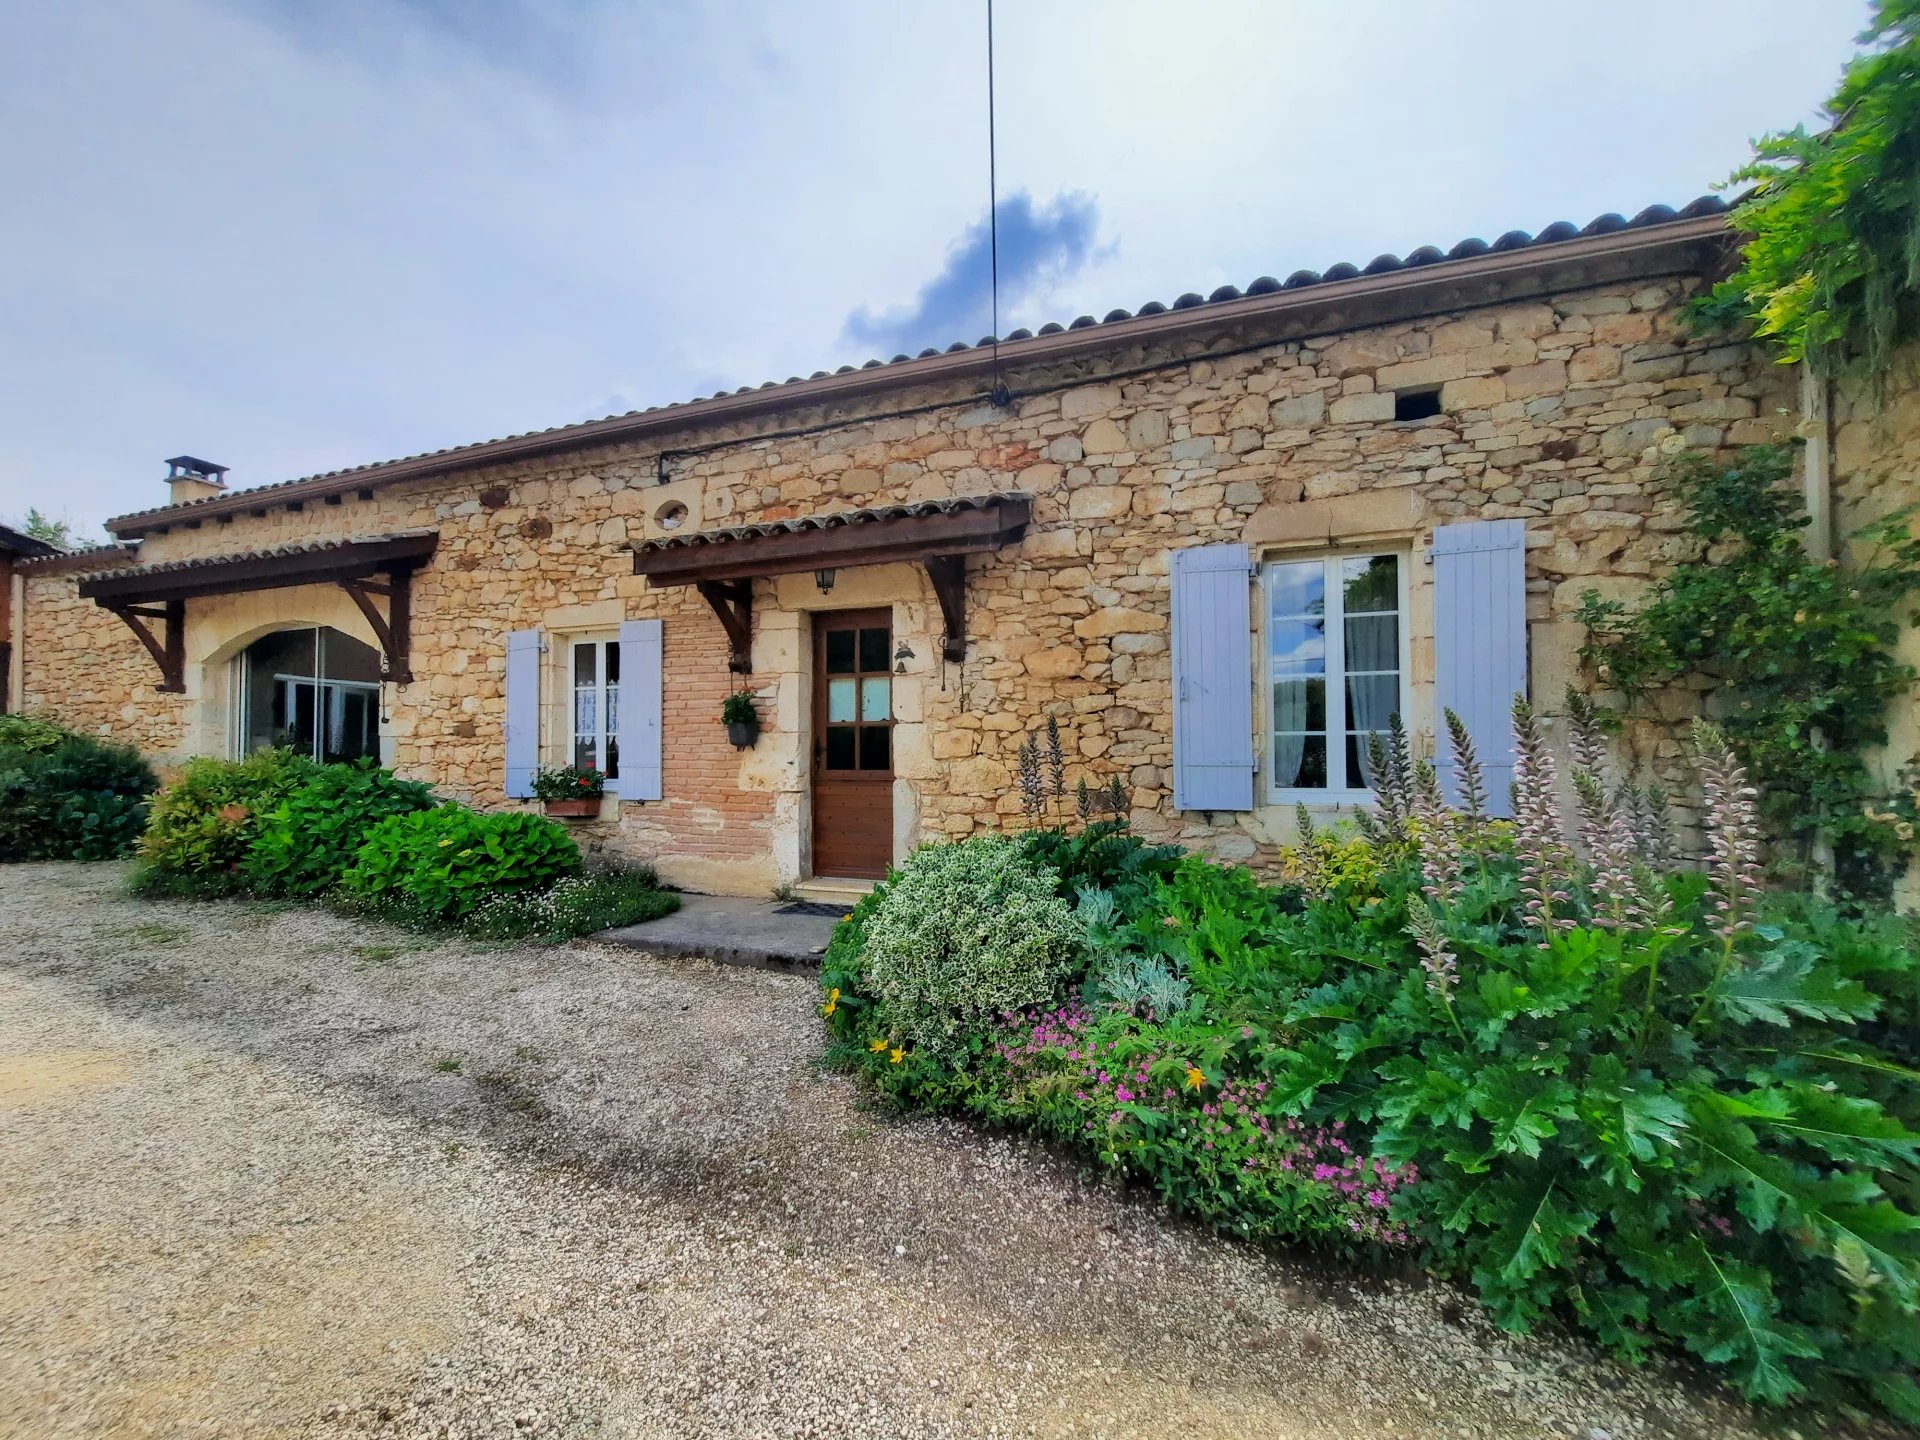 Charming restored farmhouse with indoor pool and stunning views